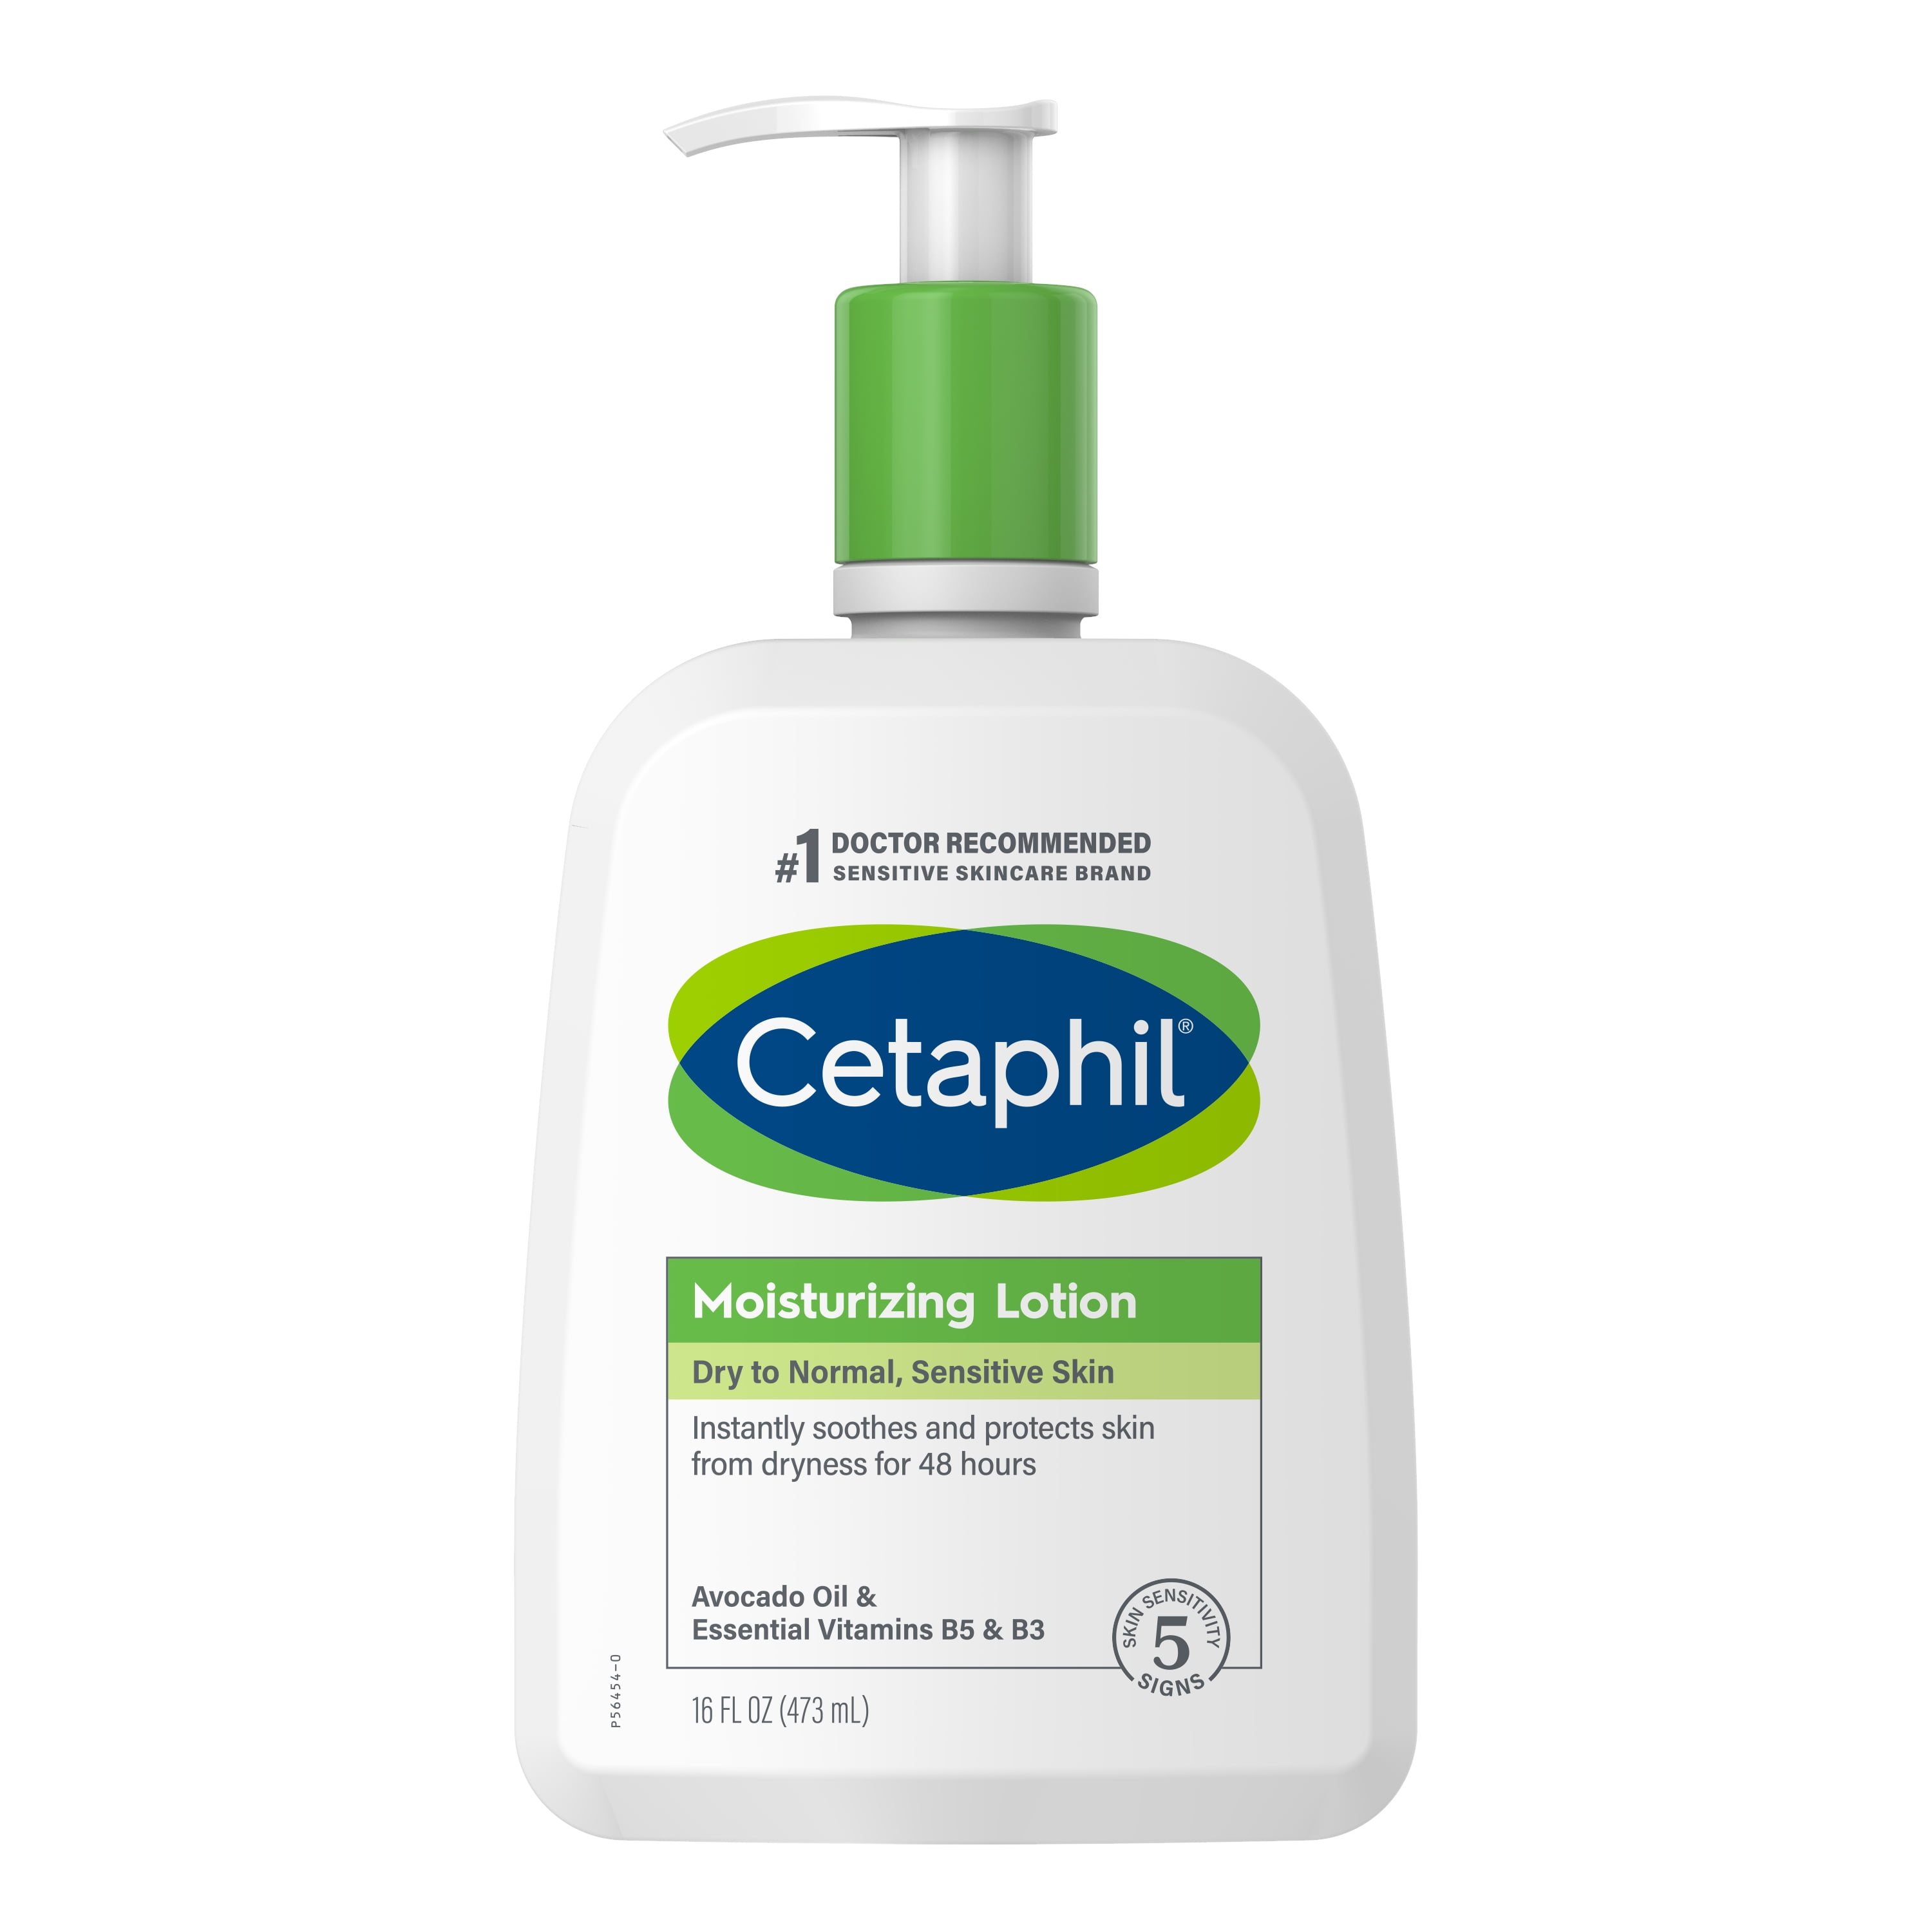 Body Moisturizer by CETAPHIL, Hydrating Moisturizing Lotion for All Skin Types, Suitable for Sensitive Skin, 16 oz, Fragrance Free, Hypoallergenic, Non-Comedogenic